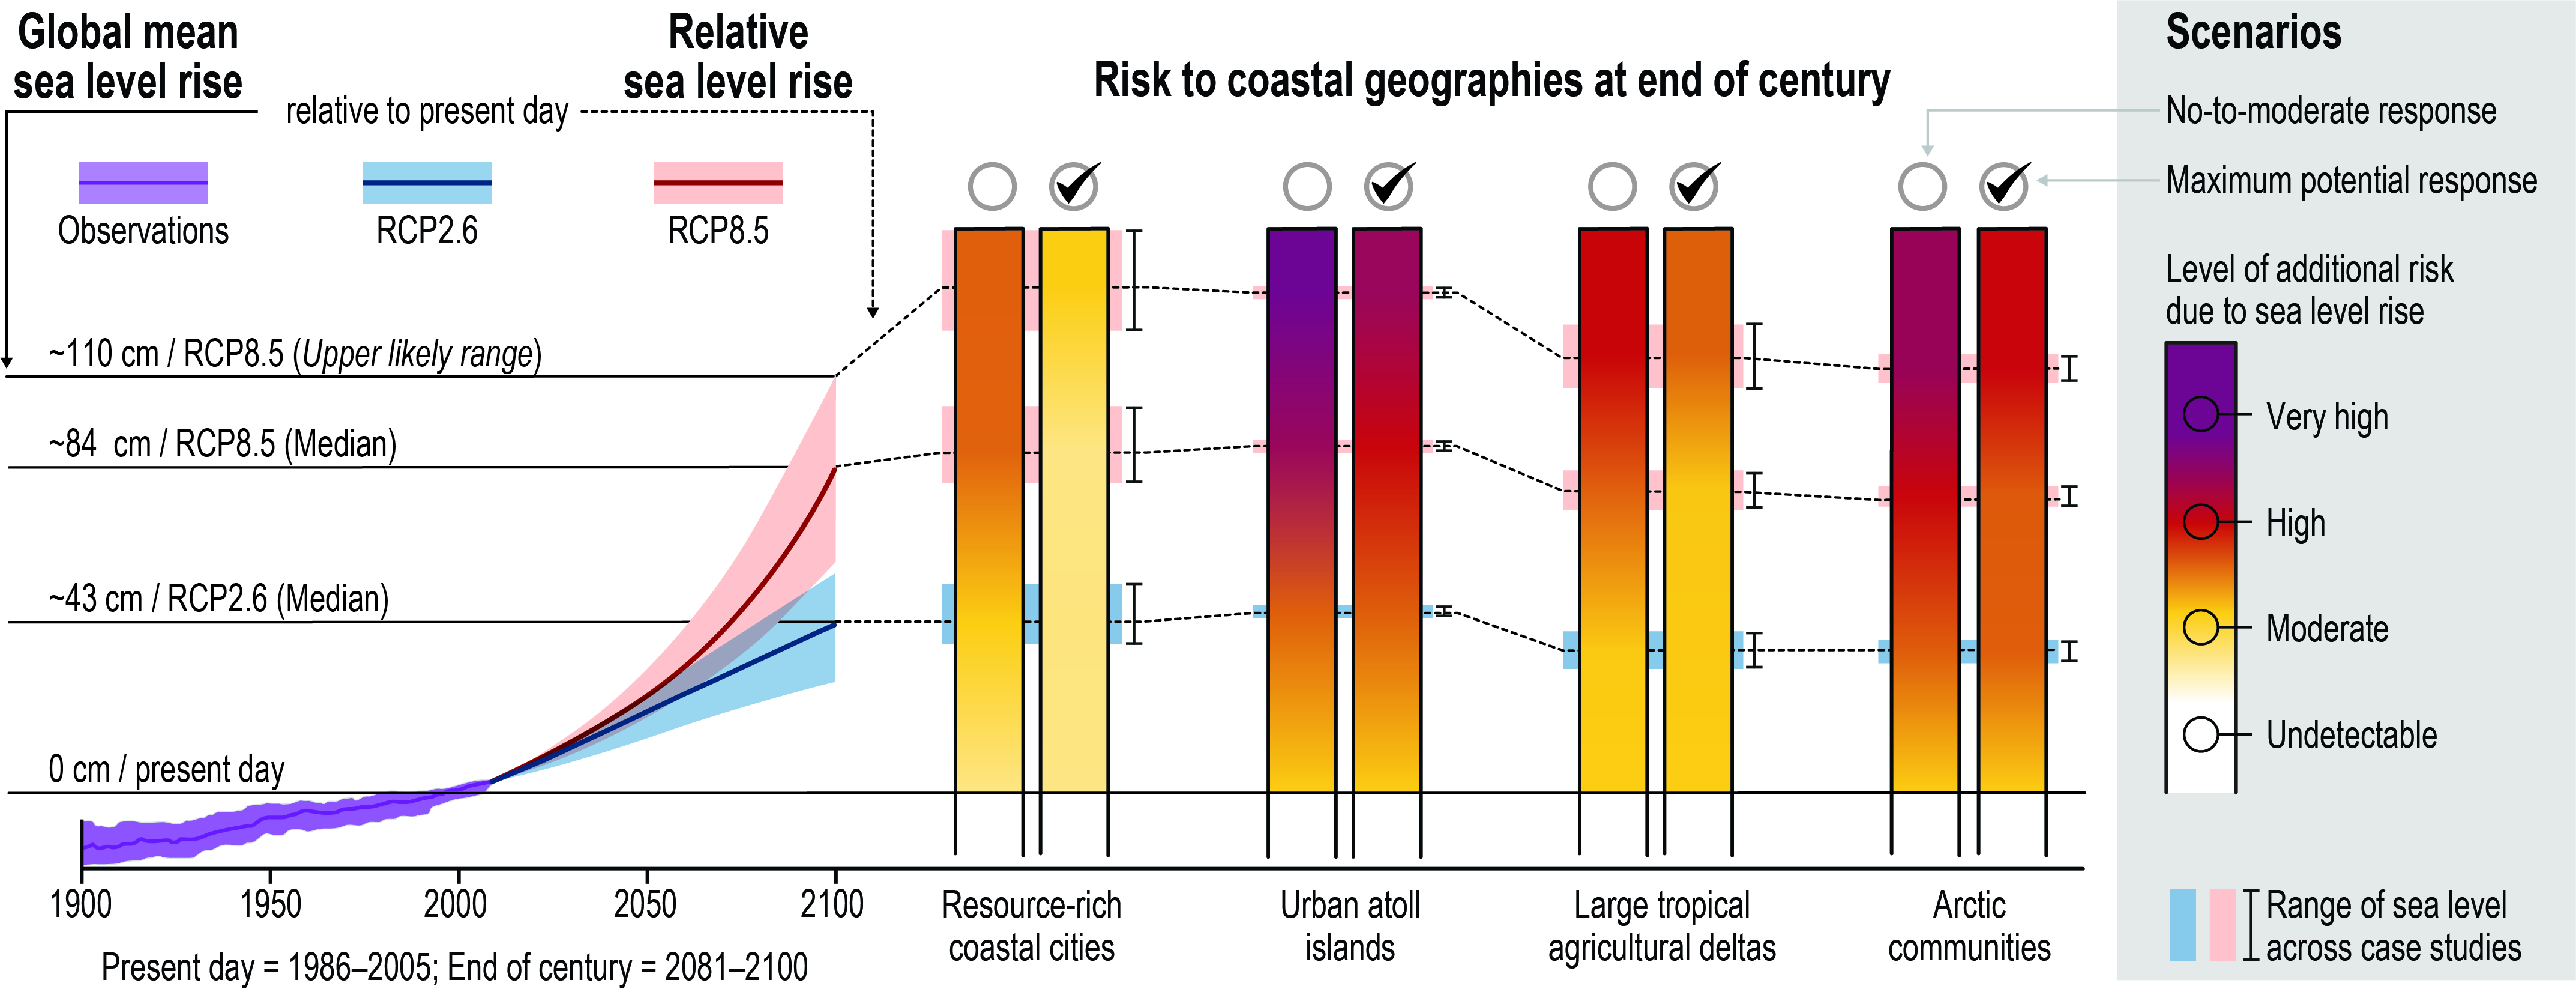 Chapter 4 Sea Level Rise And Implications For Low Lying Islands Coasts And Communities Special Report On The Ocean And Cryosphere In A Changing Climate